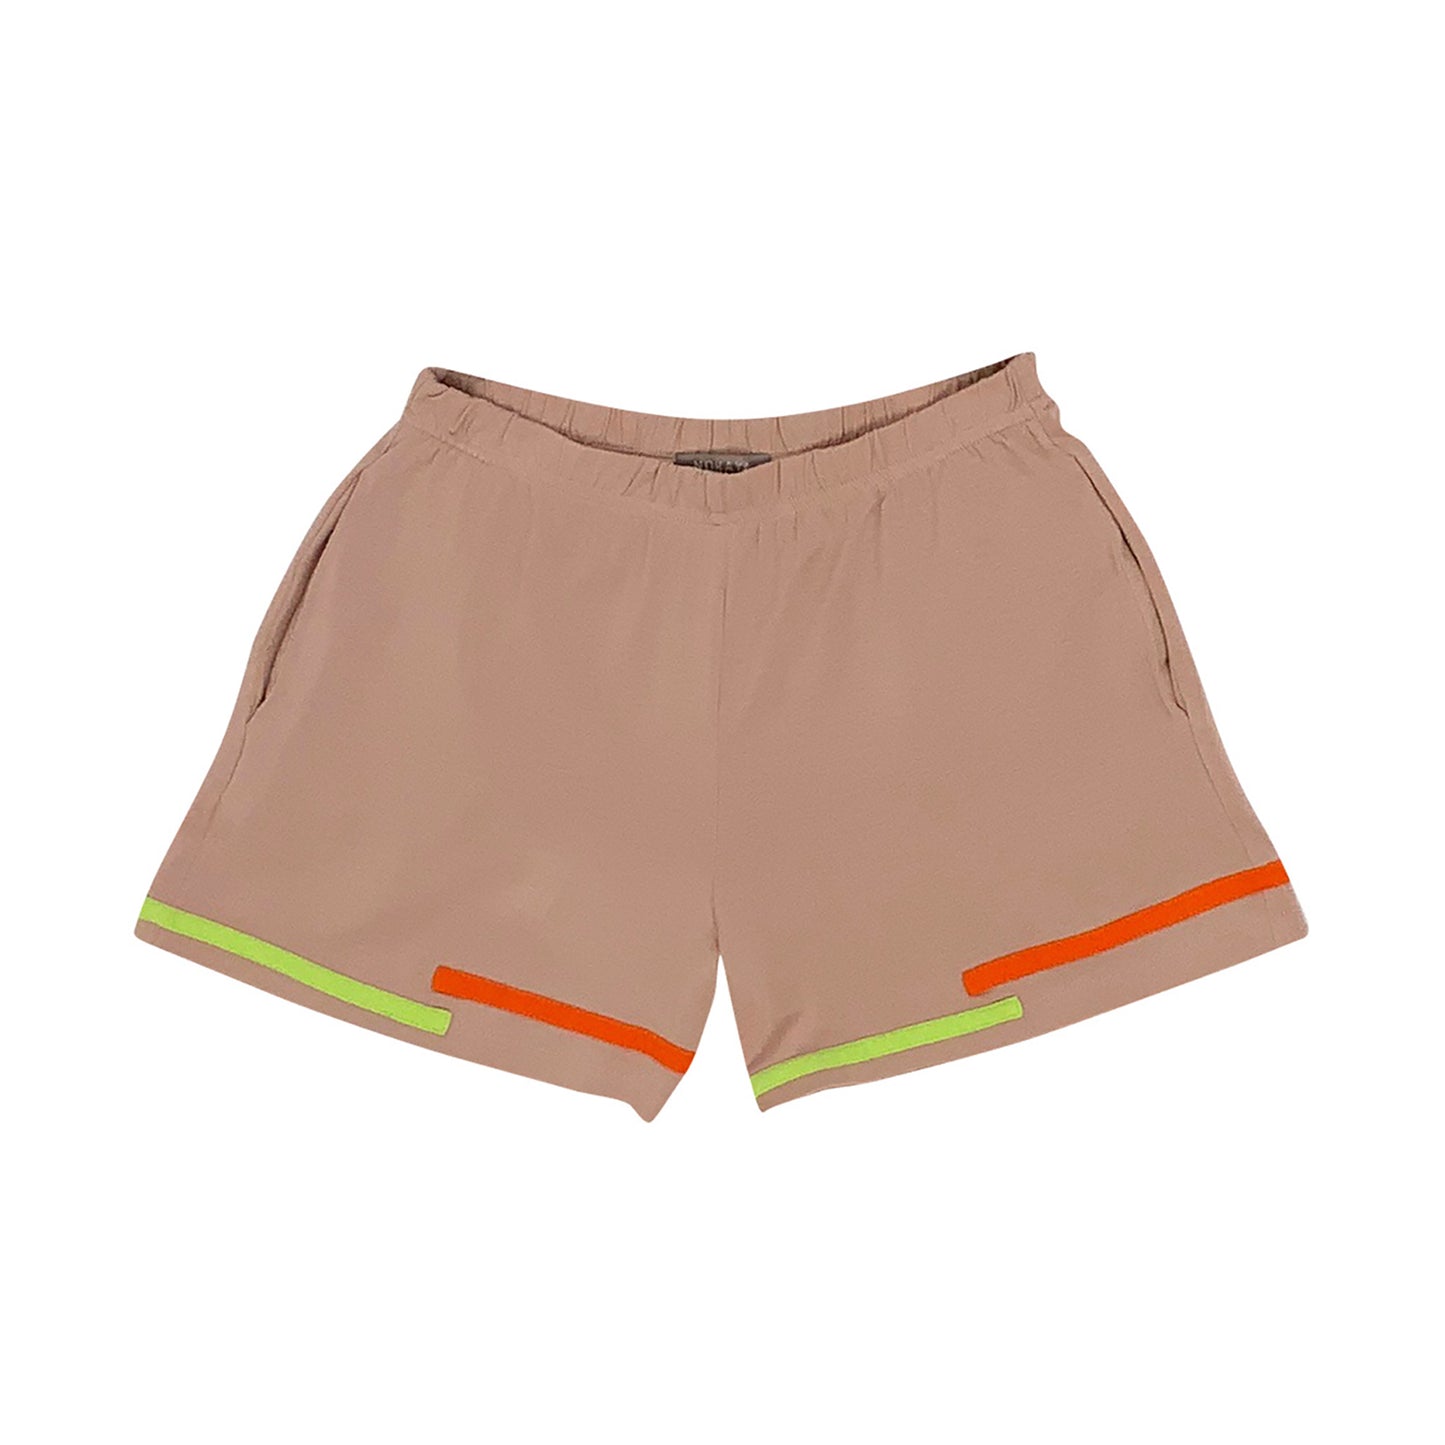 The Lovely Break shorts, nude with bright accents 